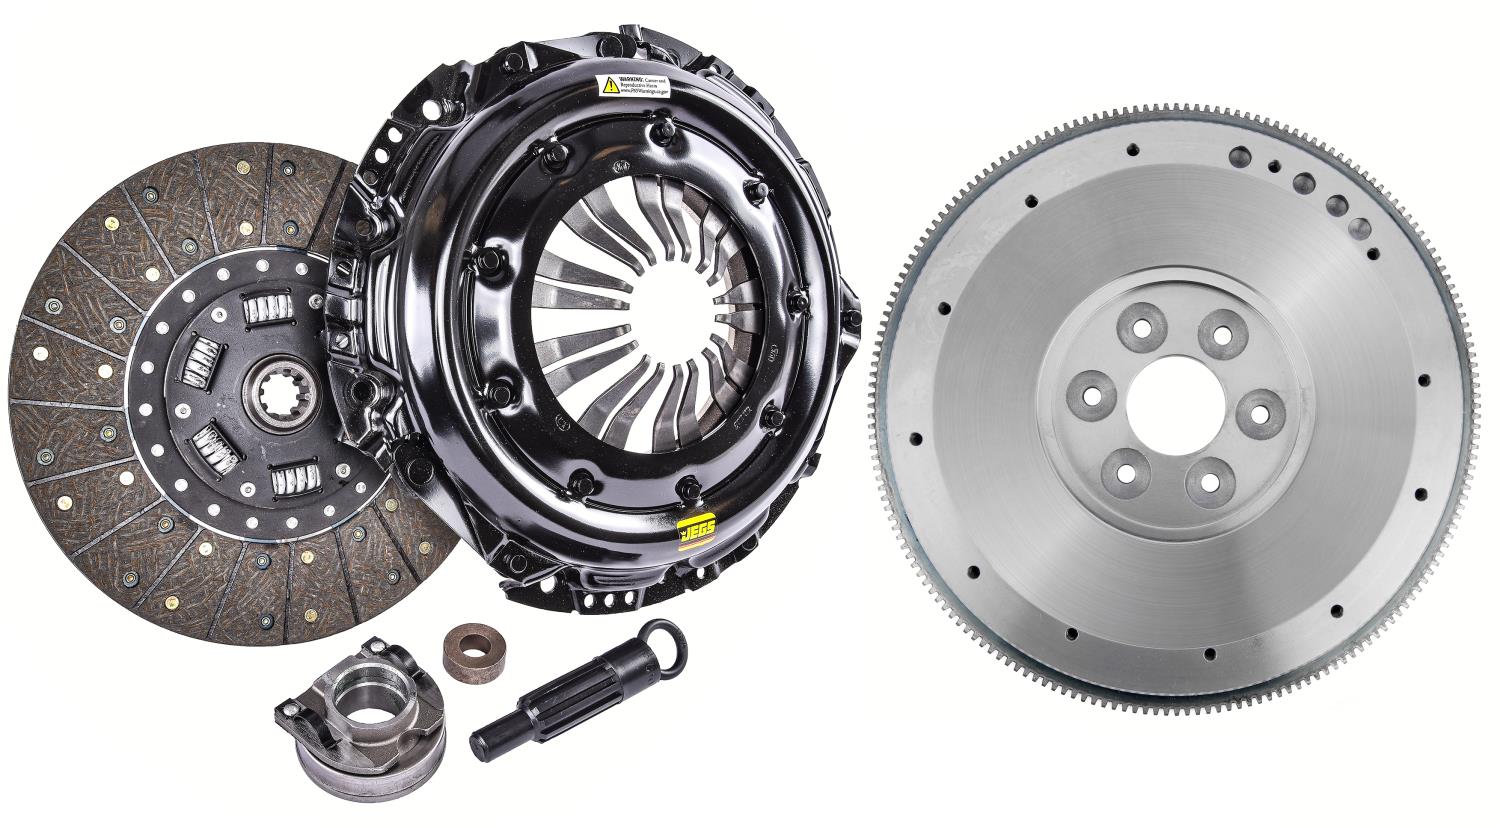 Street Performance Clutch & Flywheel Kit for Select 1963-1974 Ford Models with 332-427 FE Series V8 Engines [Internal Balance]